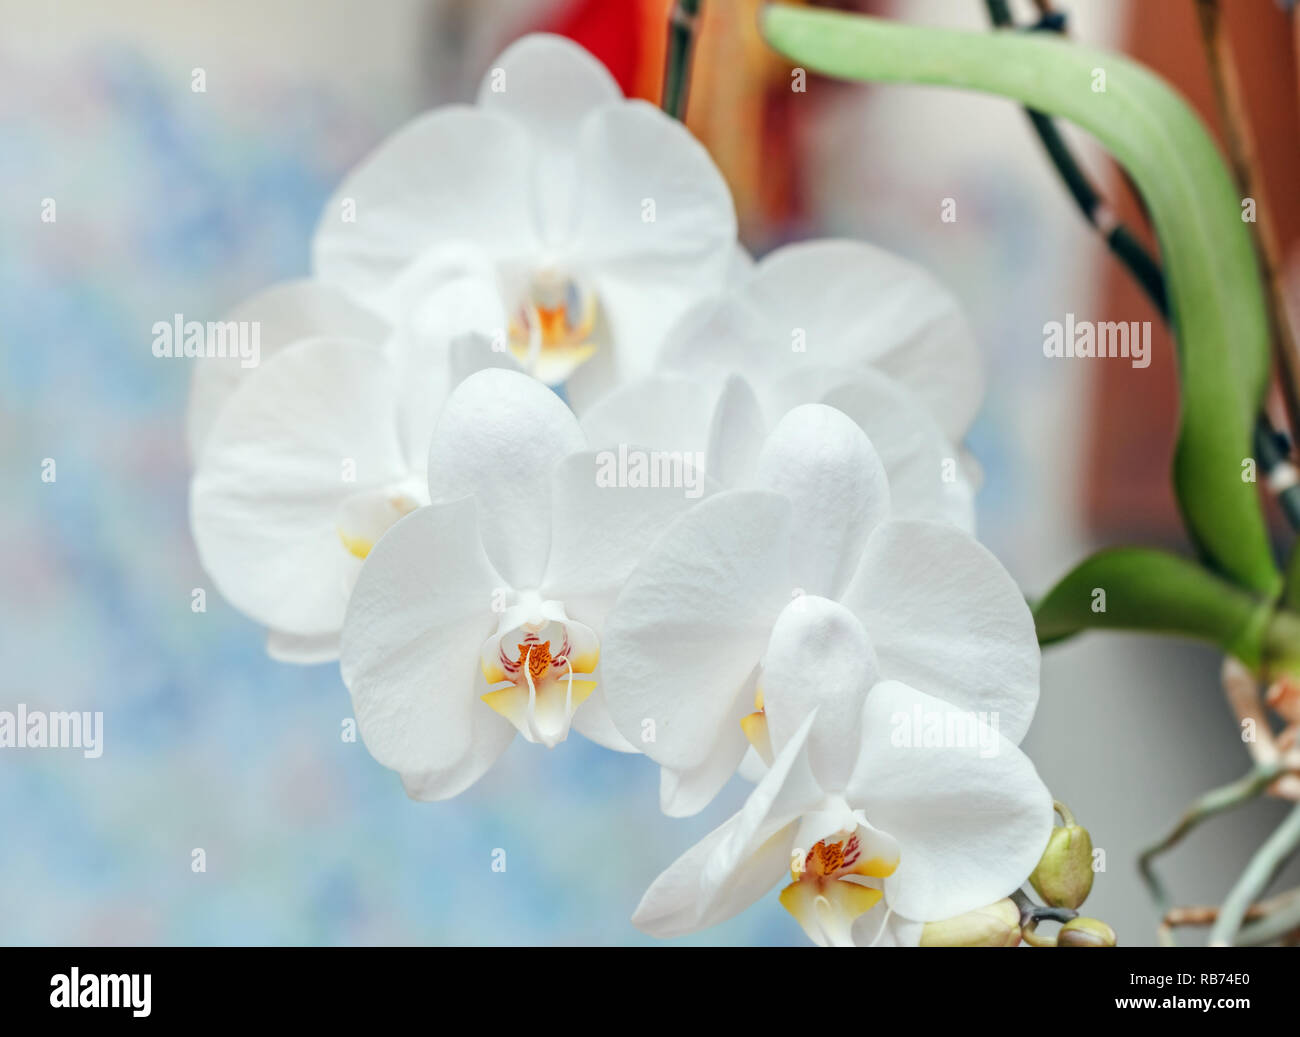 Beauty lush inflorescence of white fresh orchids flowers Stock Photo